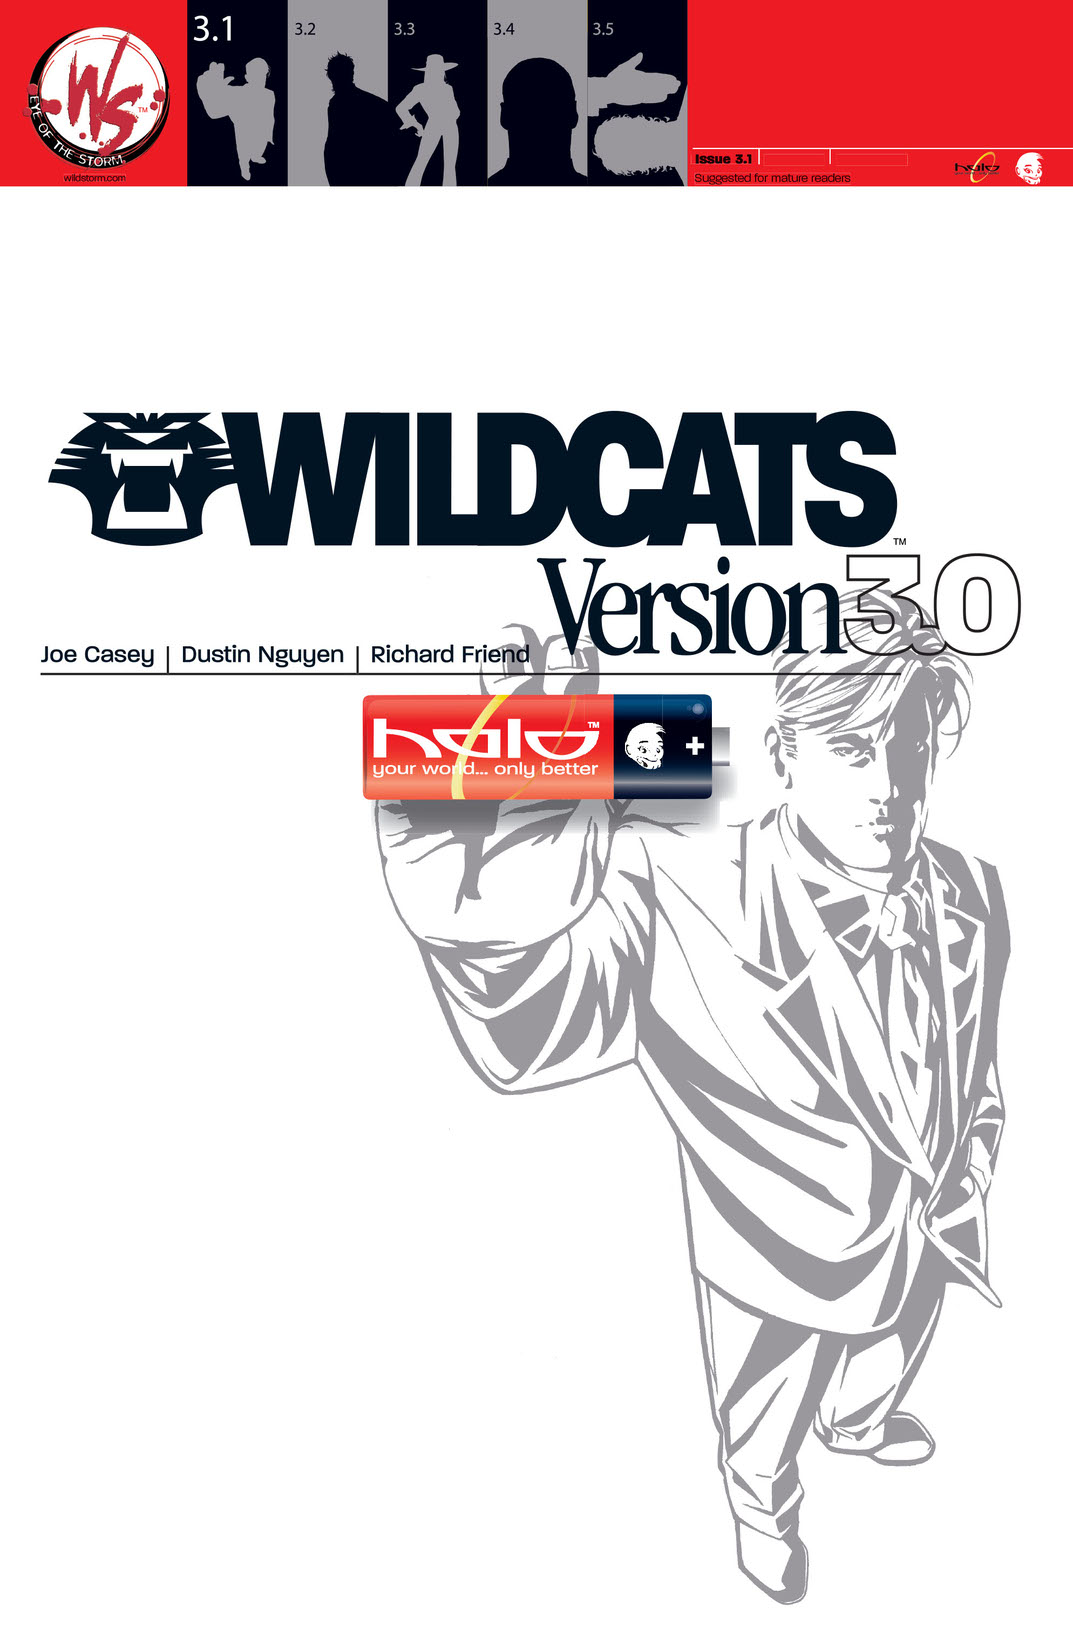 Wildcats Version 3.0 #1 preview images